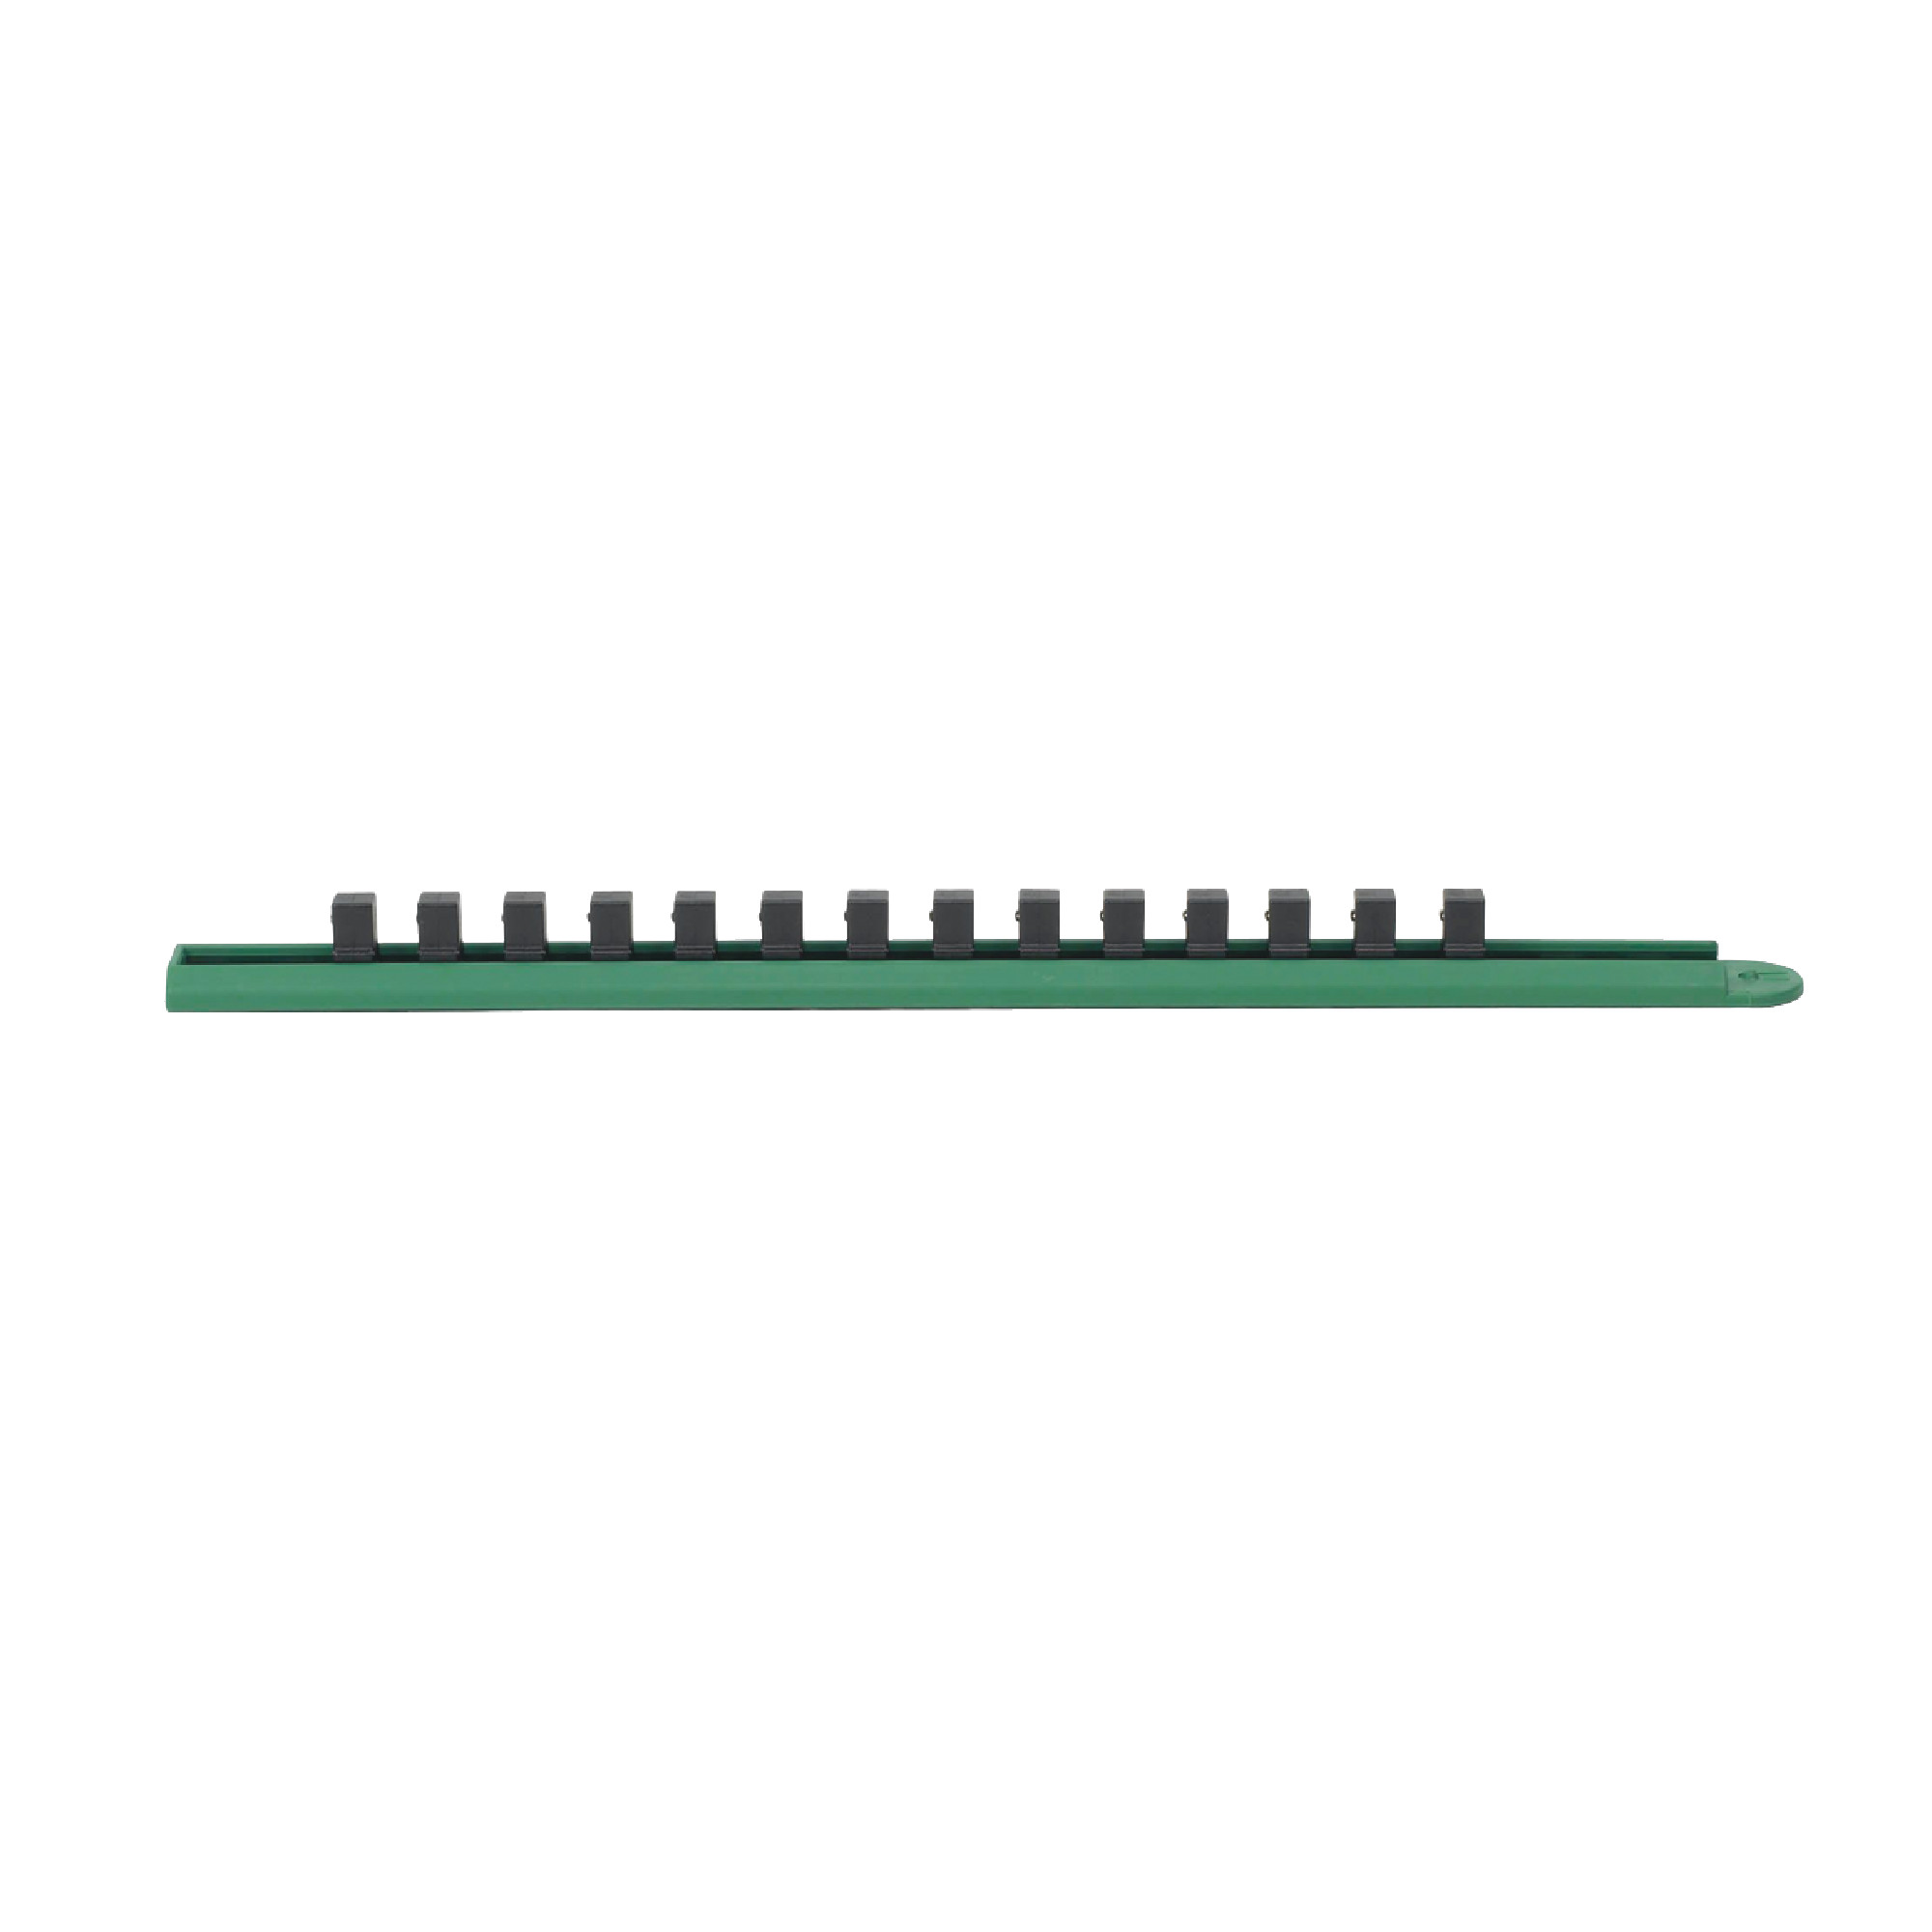 1/4" Drive 9" Green Socket Rail With 13 Clips - Model: 83109